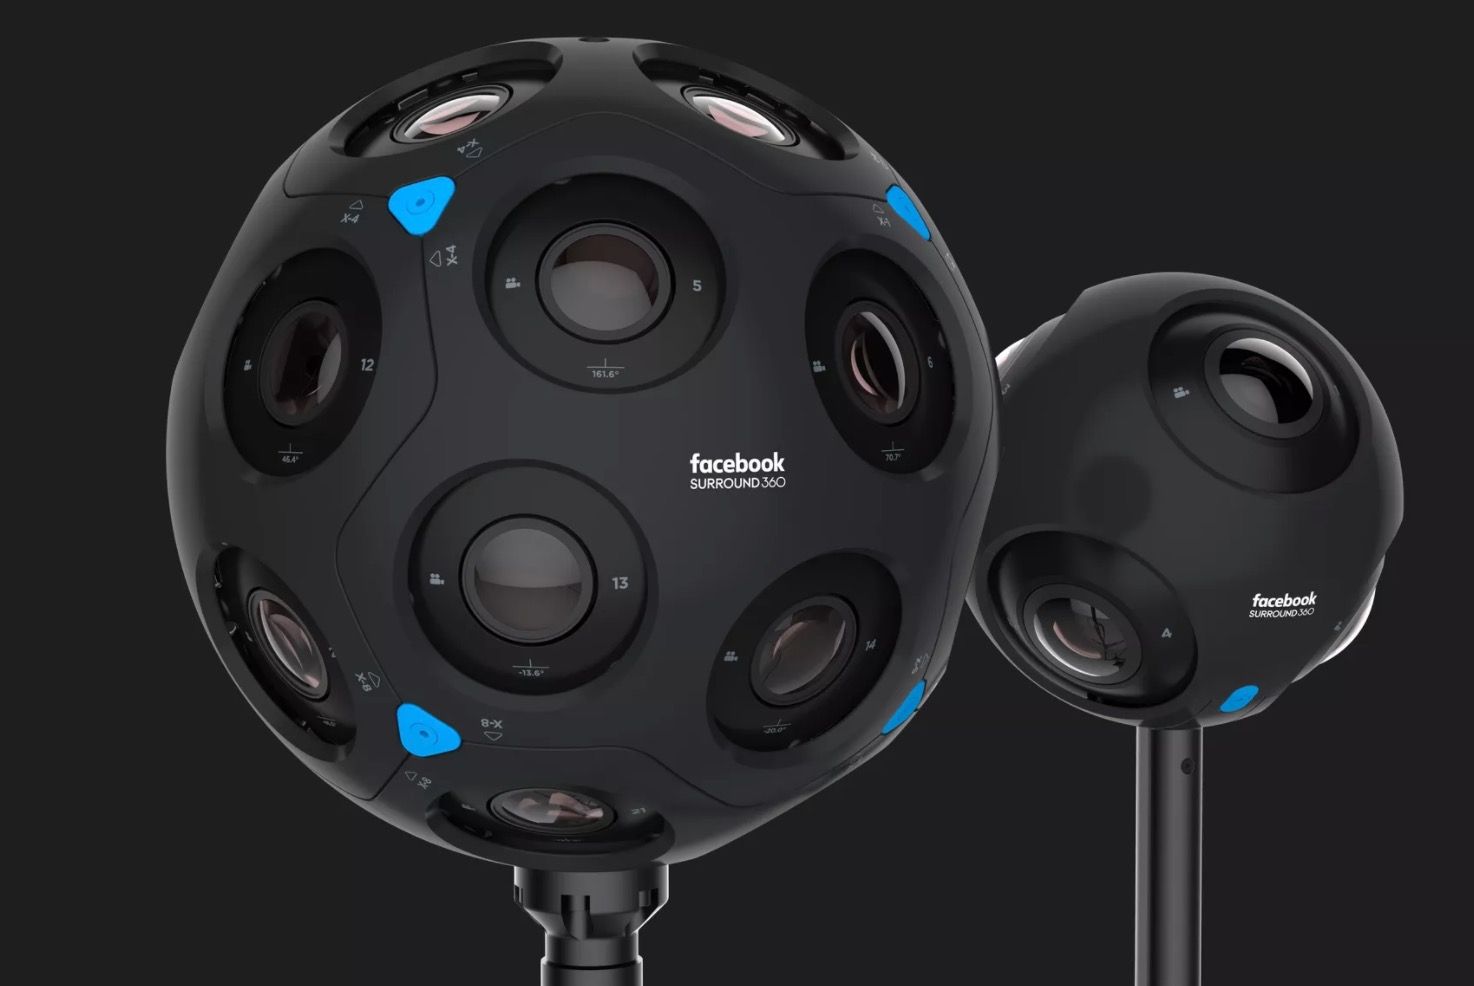 facebook s new surround 360 vr cameras will go on sale this year image 1